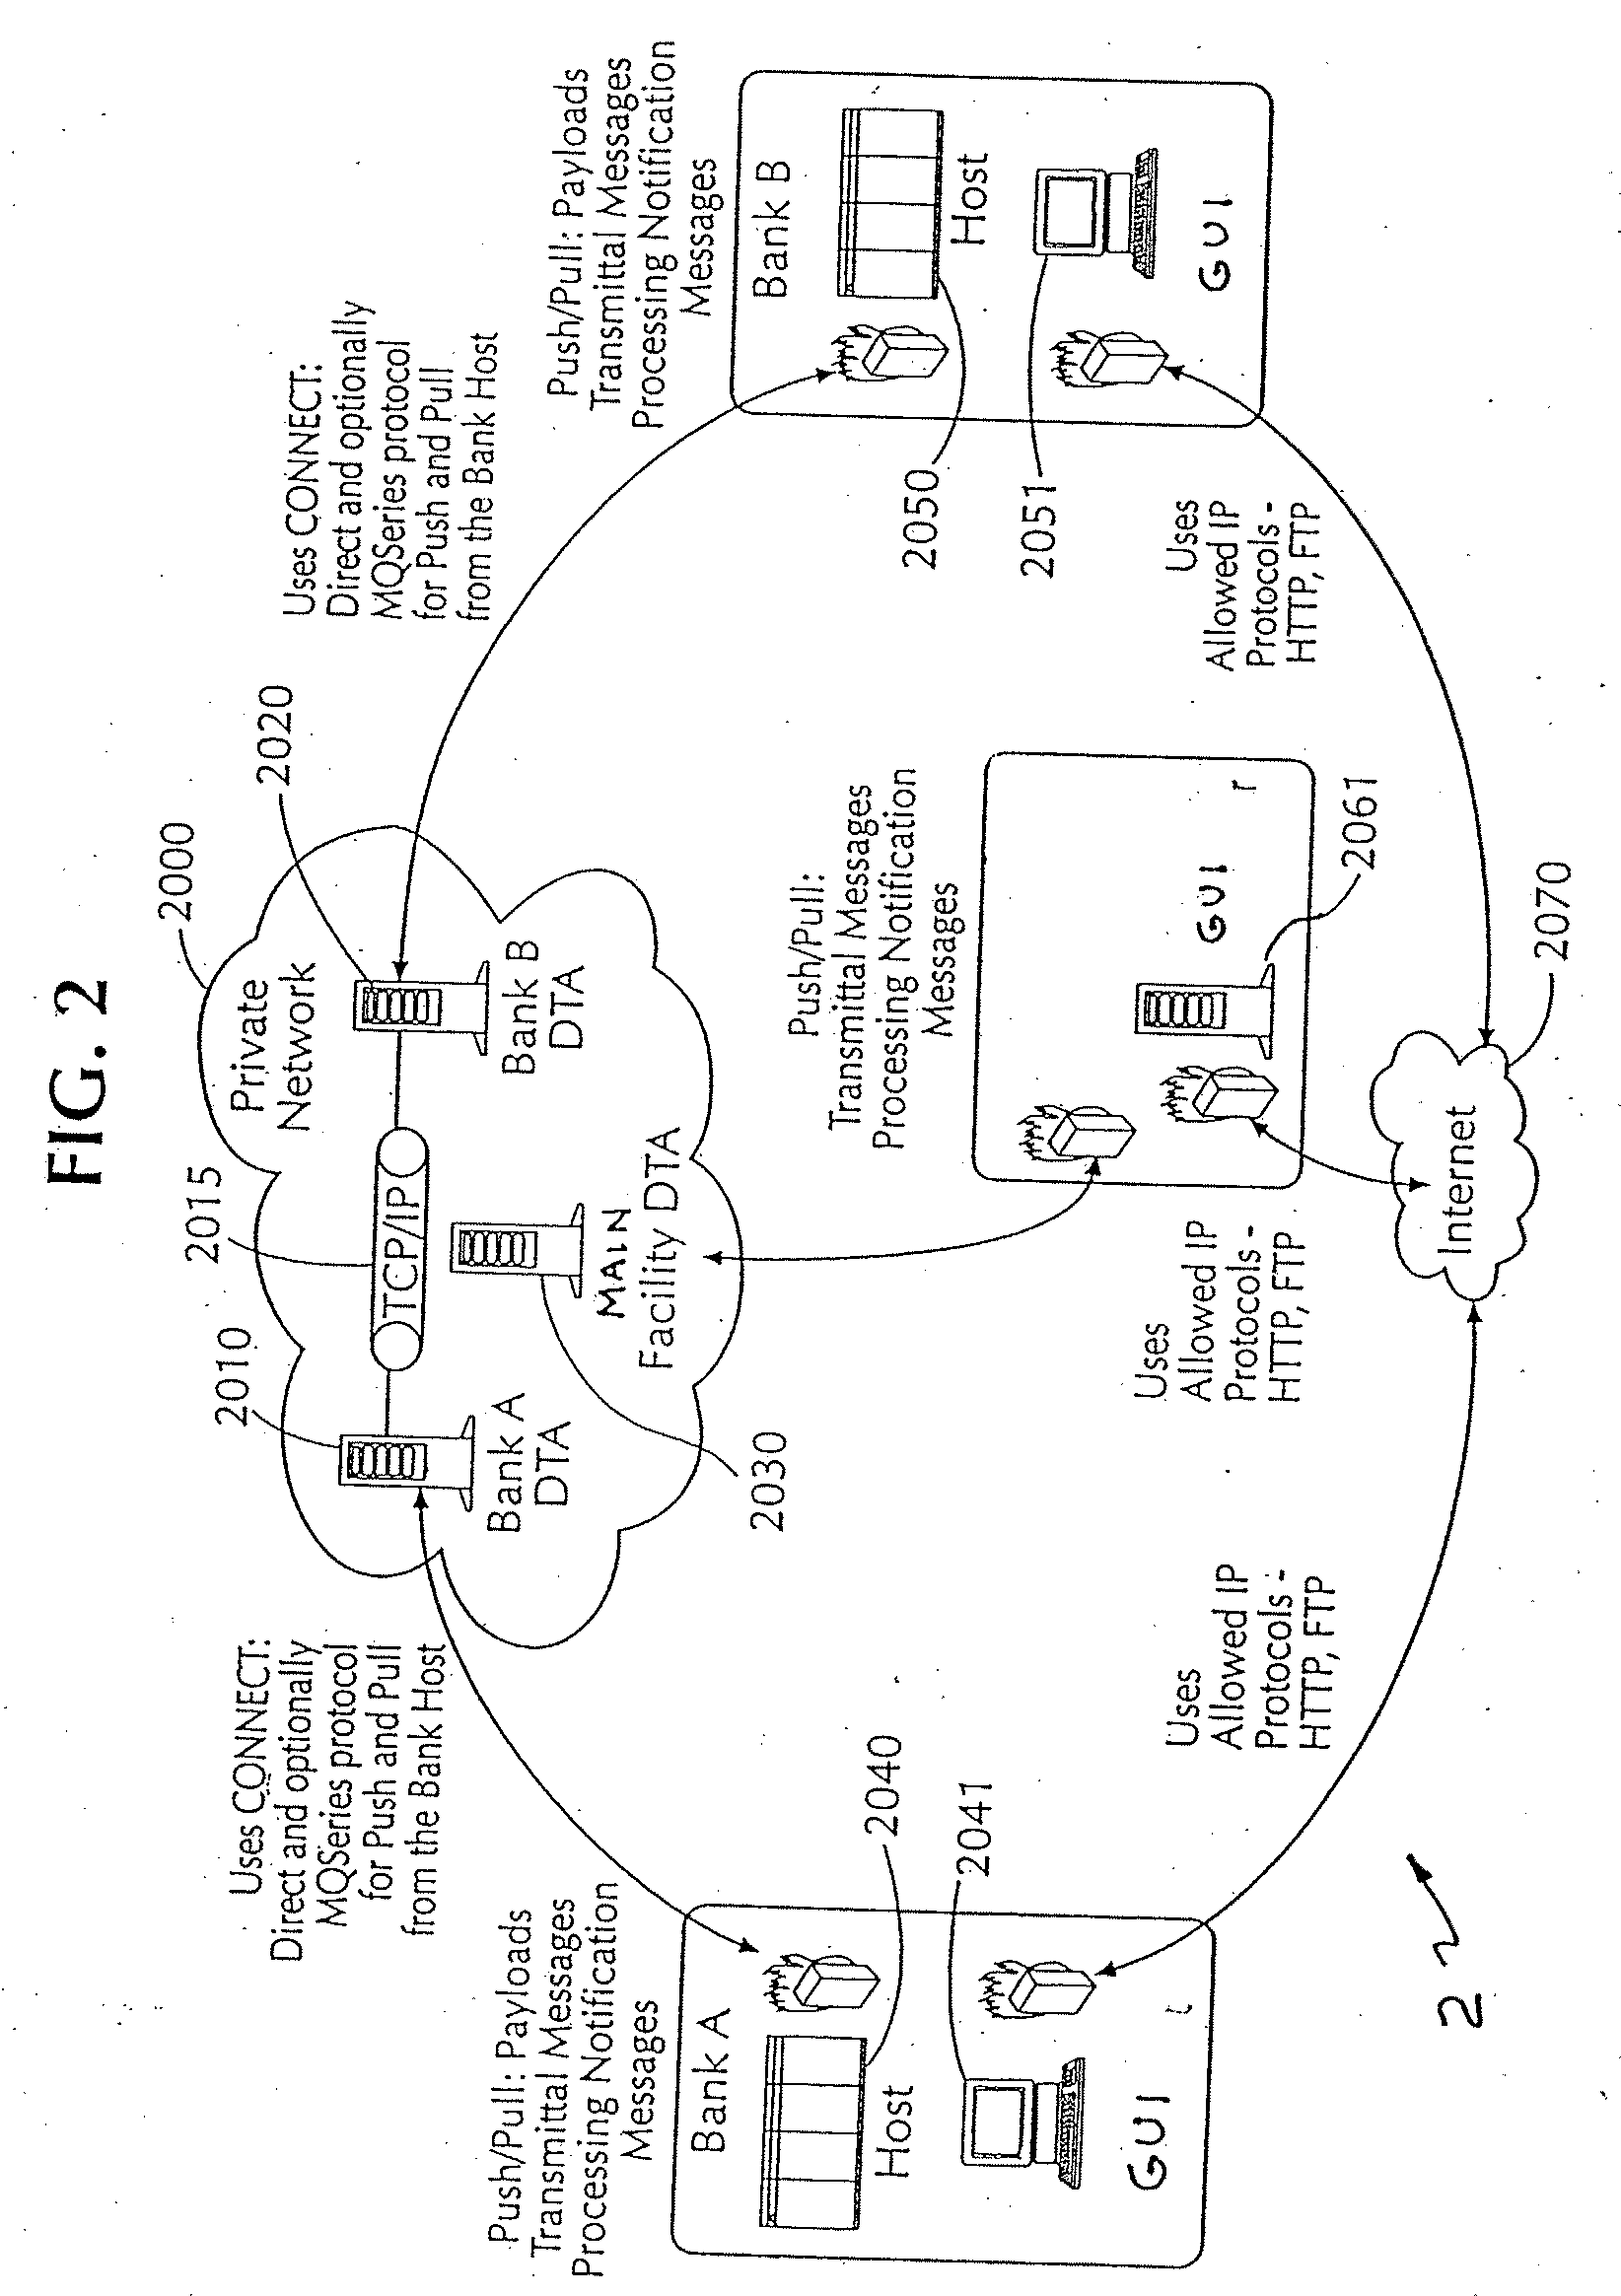 Method and system for electronic settlement of checks